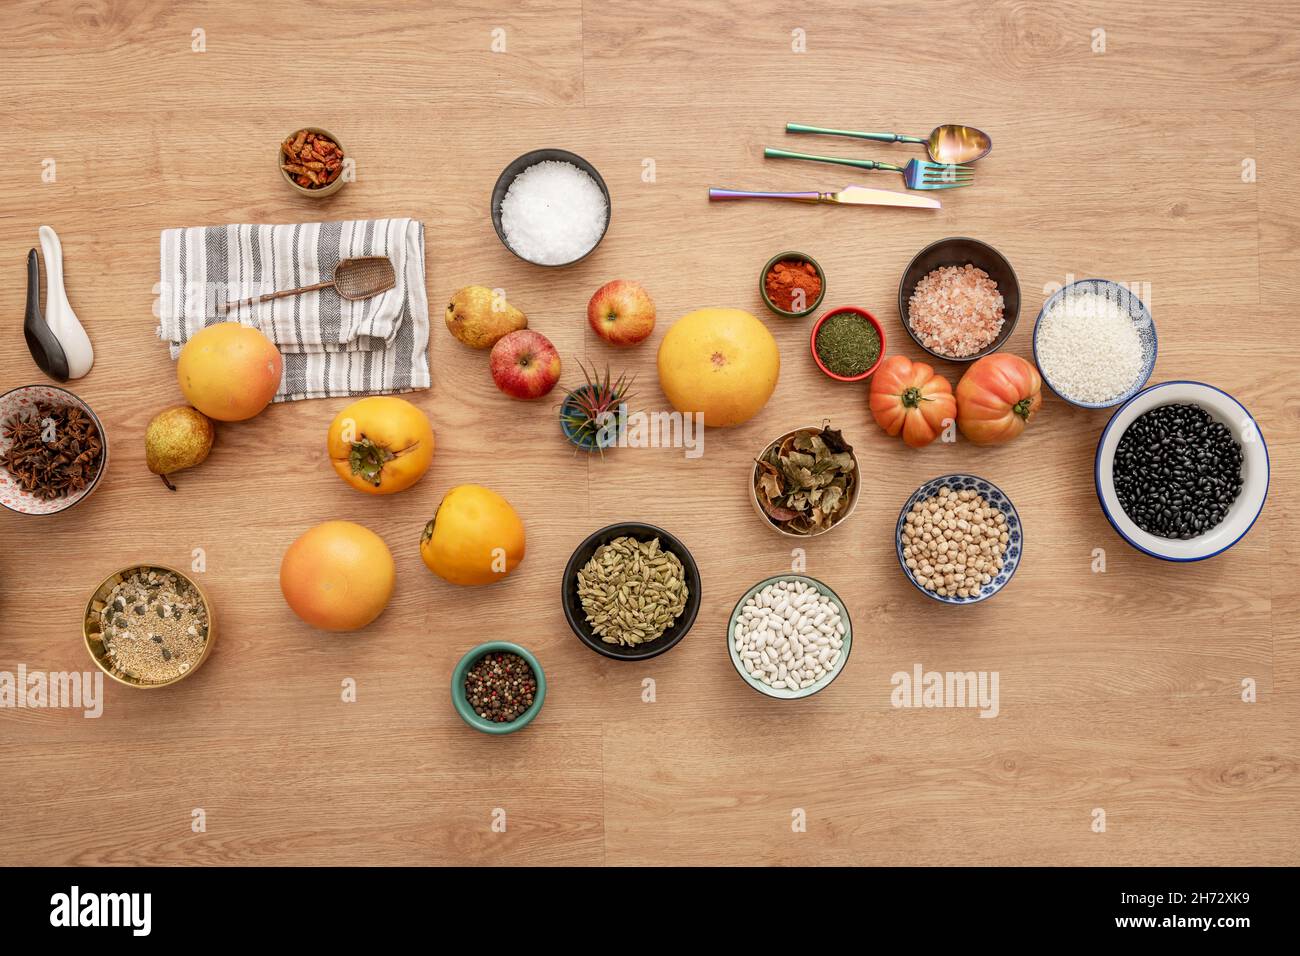 Still life with fruits and condiments to prepare Mediterranean food recipes Stock Photo